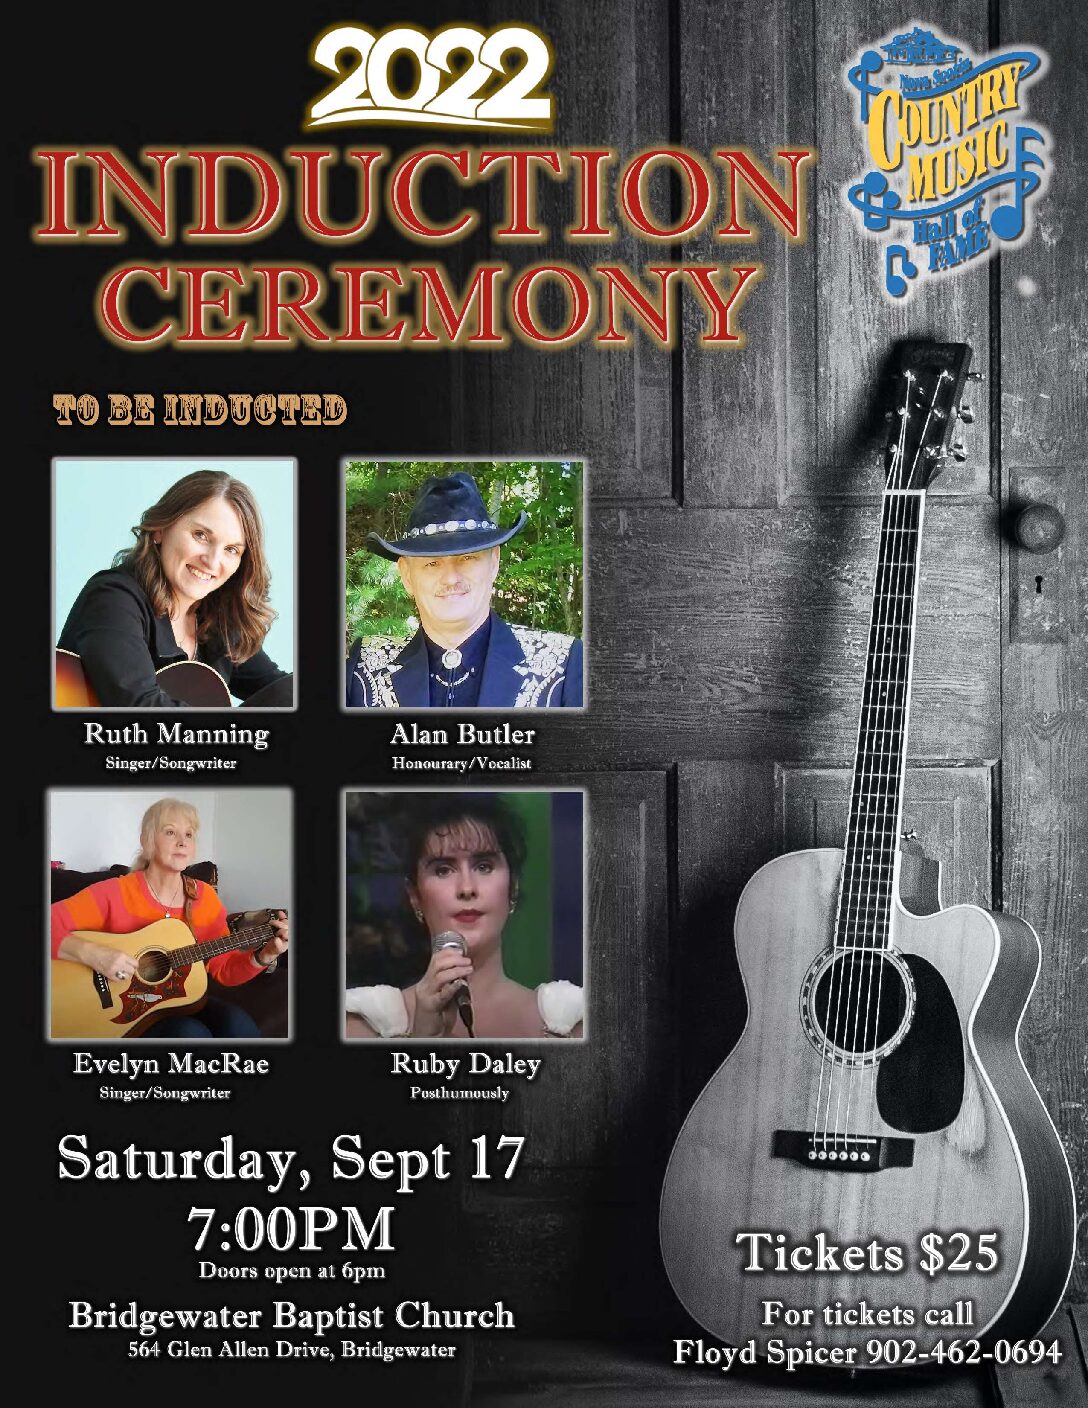 NS COUNTRY MUSIC HALL OF FAME INDUCTION 2022 – NEWEST INDUCTEES